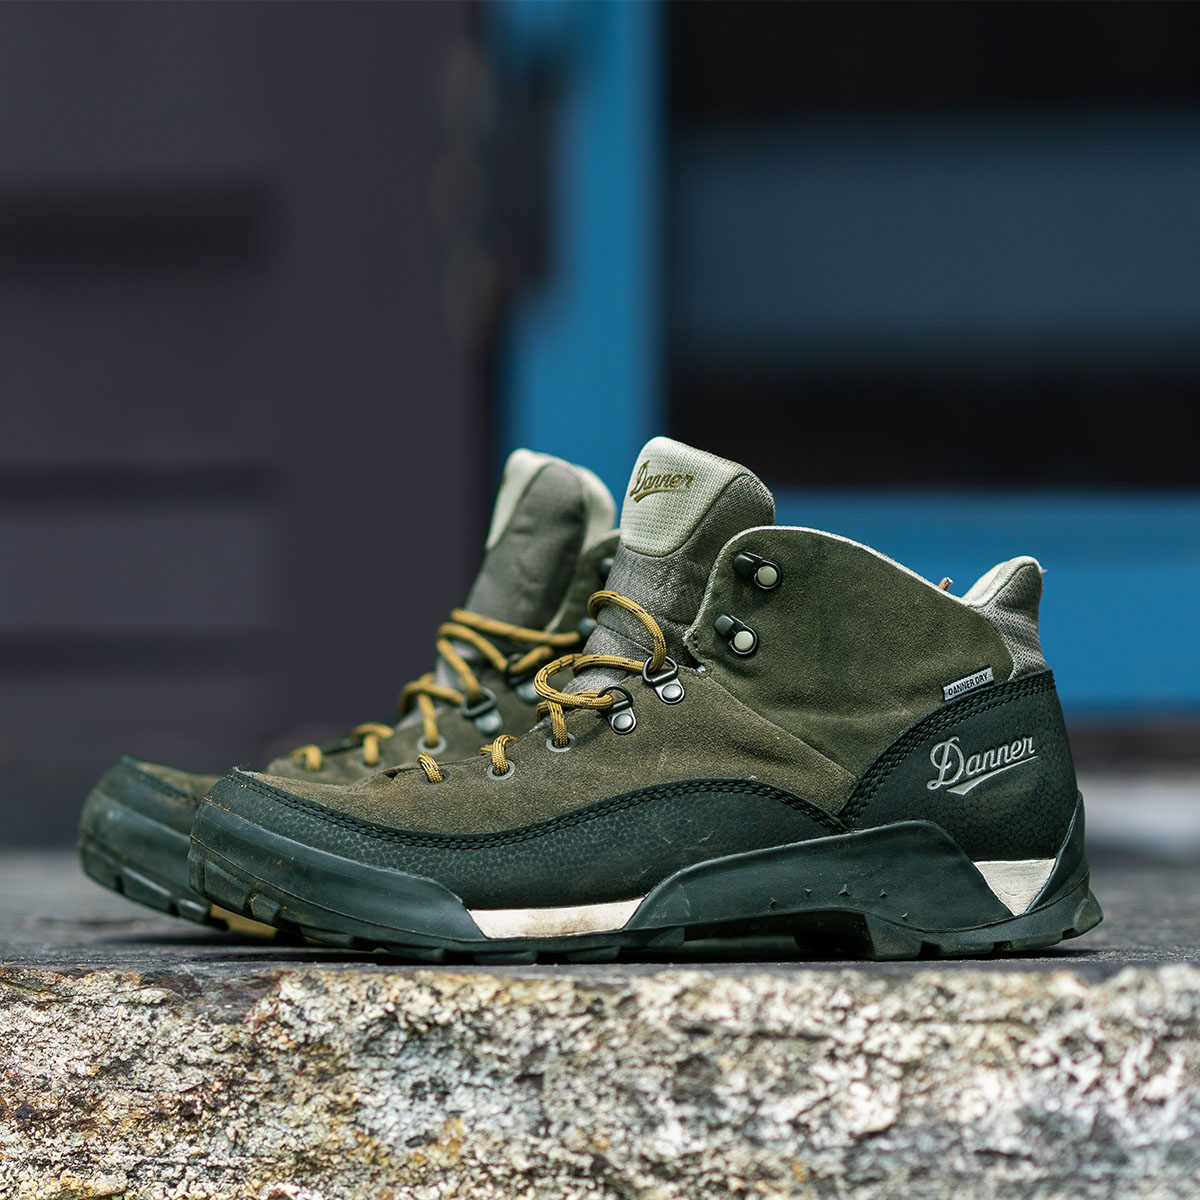 Danner Panorama Mid Boot Black Olive, a comfortable and stable boot that keeps your feet steady on rocky or changeable terrain